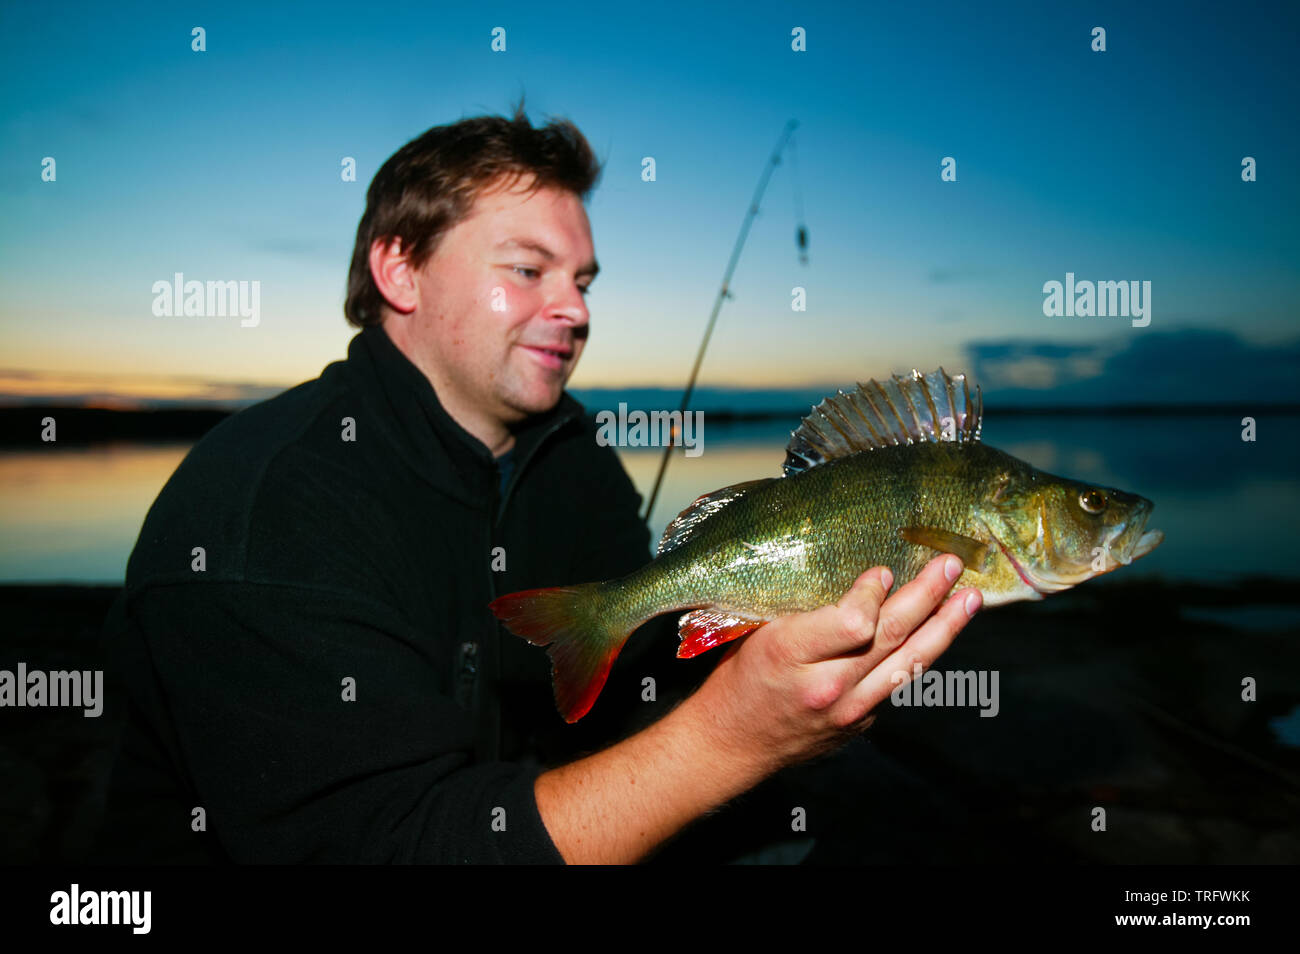 The Norwegian Jan Andre Ulriksen with a common perch, Perca fluviatilis, caught in the lake Vansjø in Østfold, Norway. Vansjø is the largest lake in Østfold, and a popular area for fishing. Vansjø and its surrounding lakes and rivers are a part of the water system called Morsavassdraget. September, 2006. Stock Photo